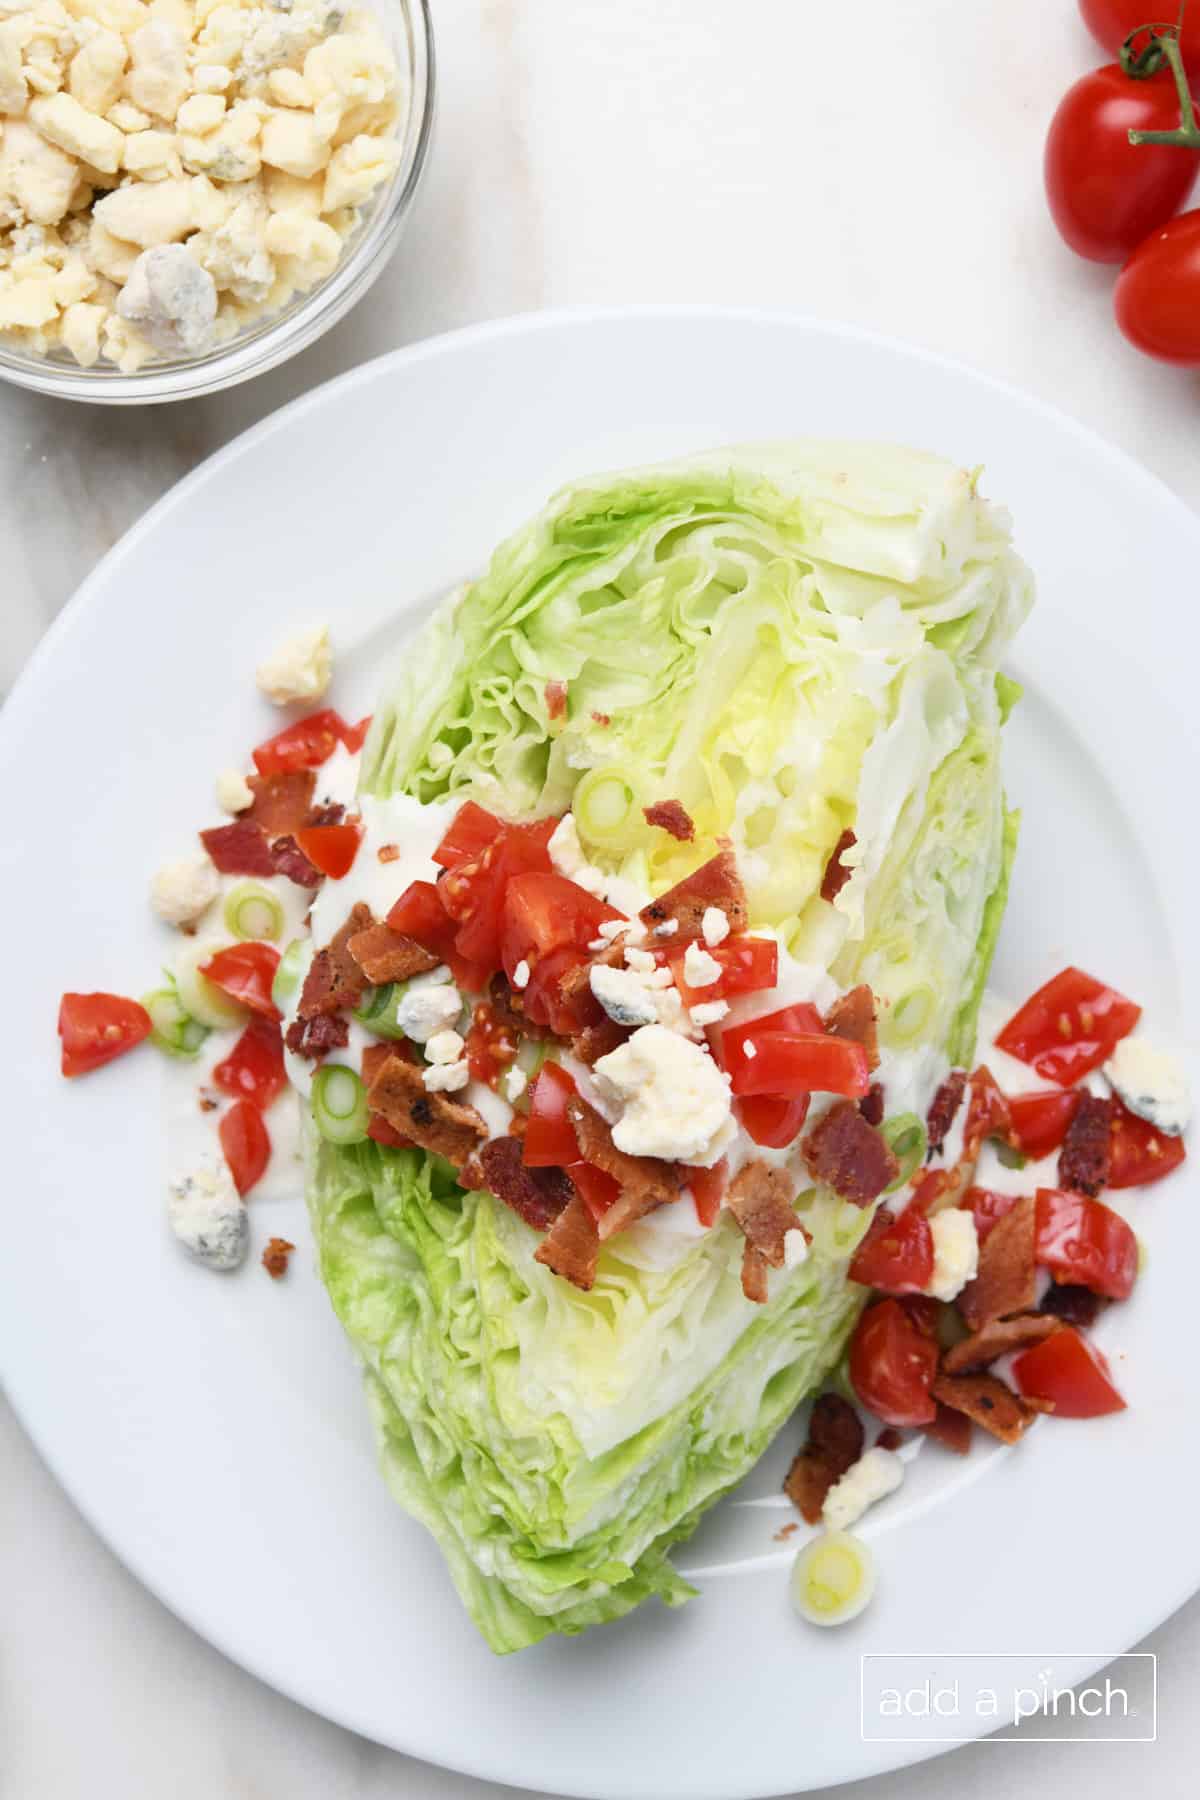 Wedge salad with bacon, tomatoes, and blue cheese.